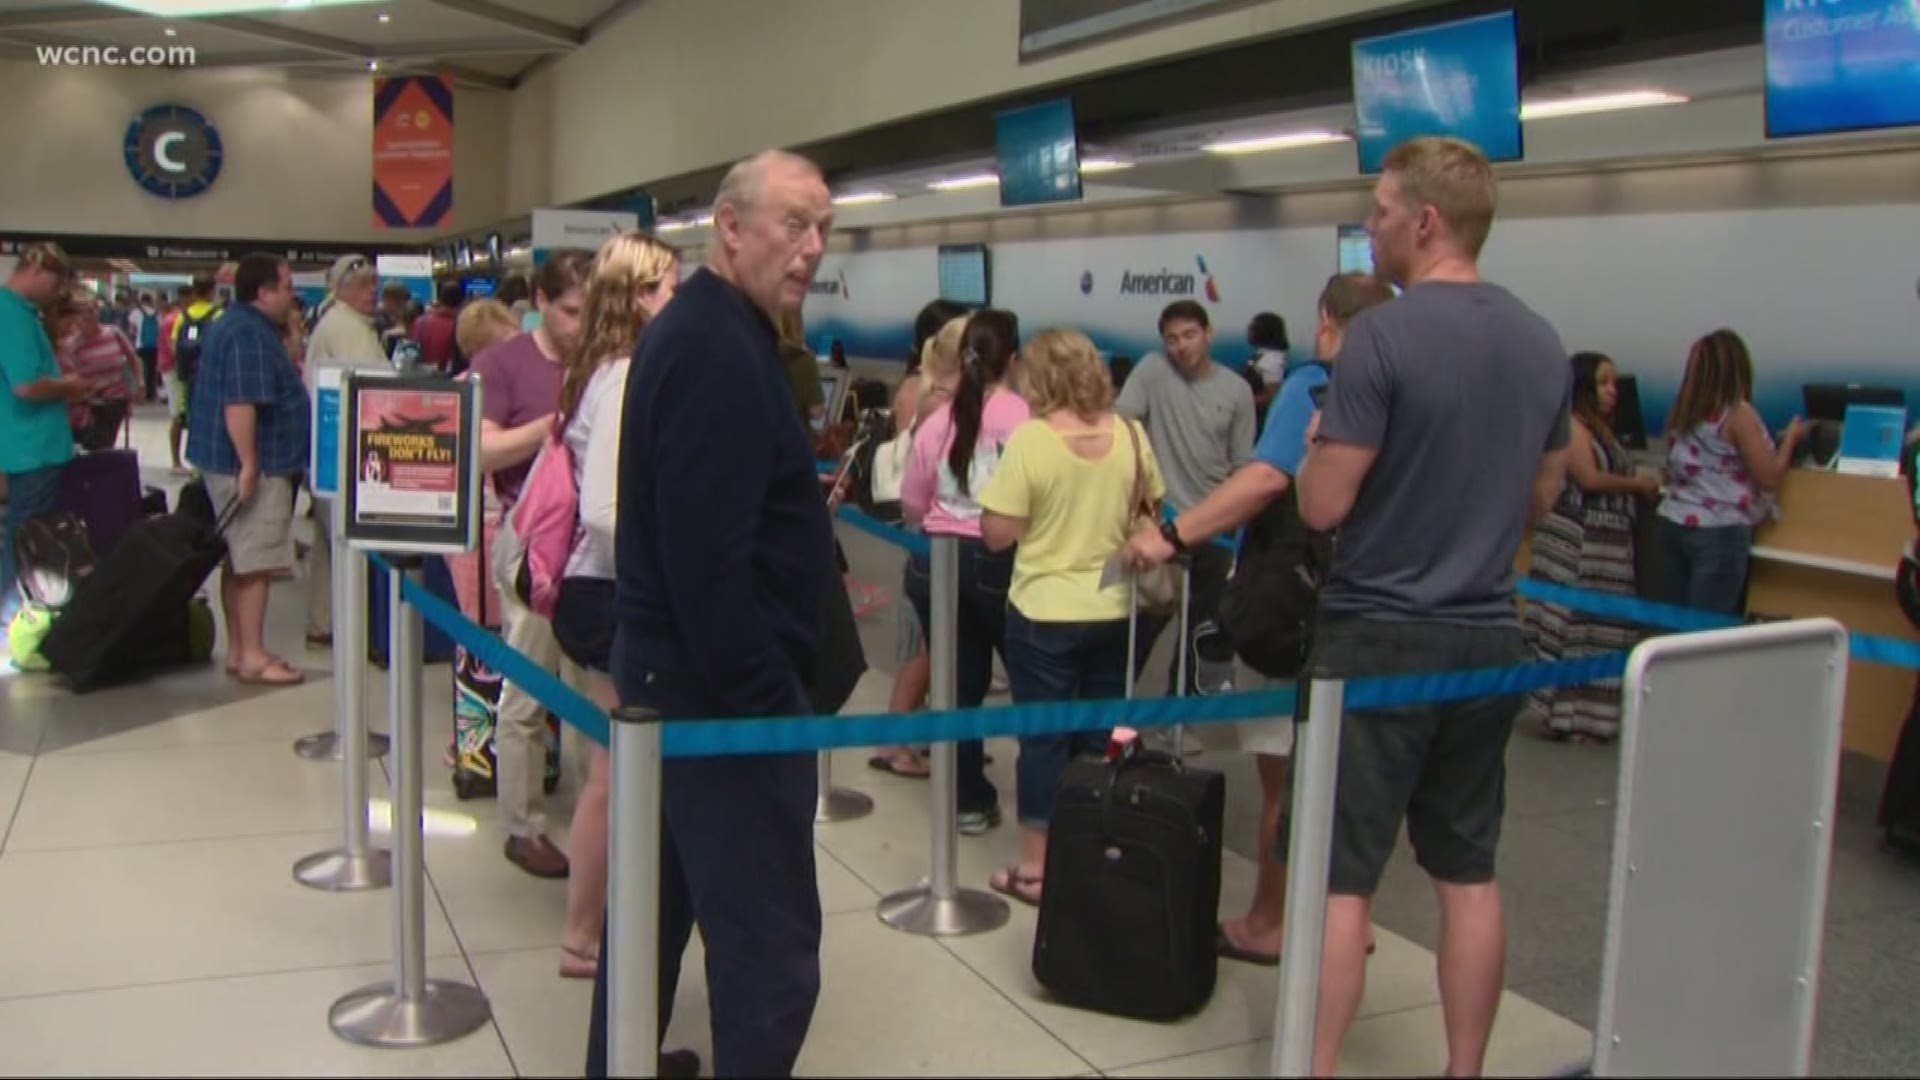 For the second time in a week, a technical glitch is causing major issues for travelers at the Charlotte Douglas International Airport.